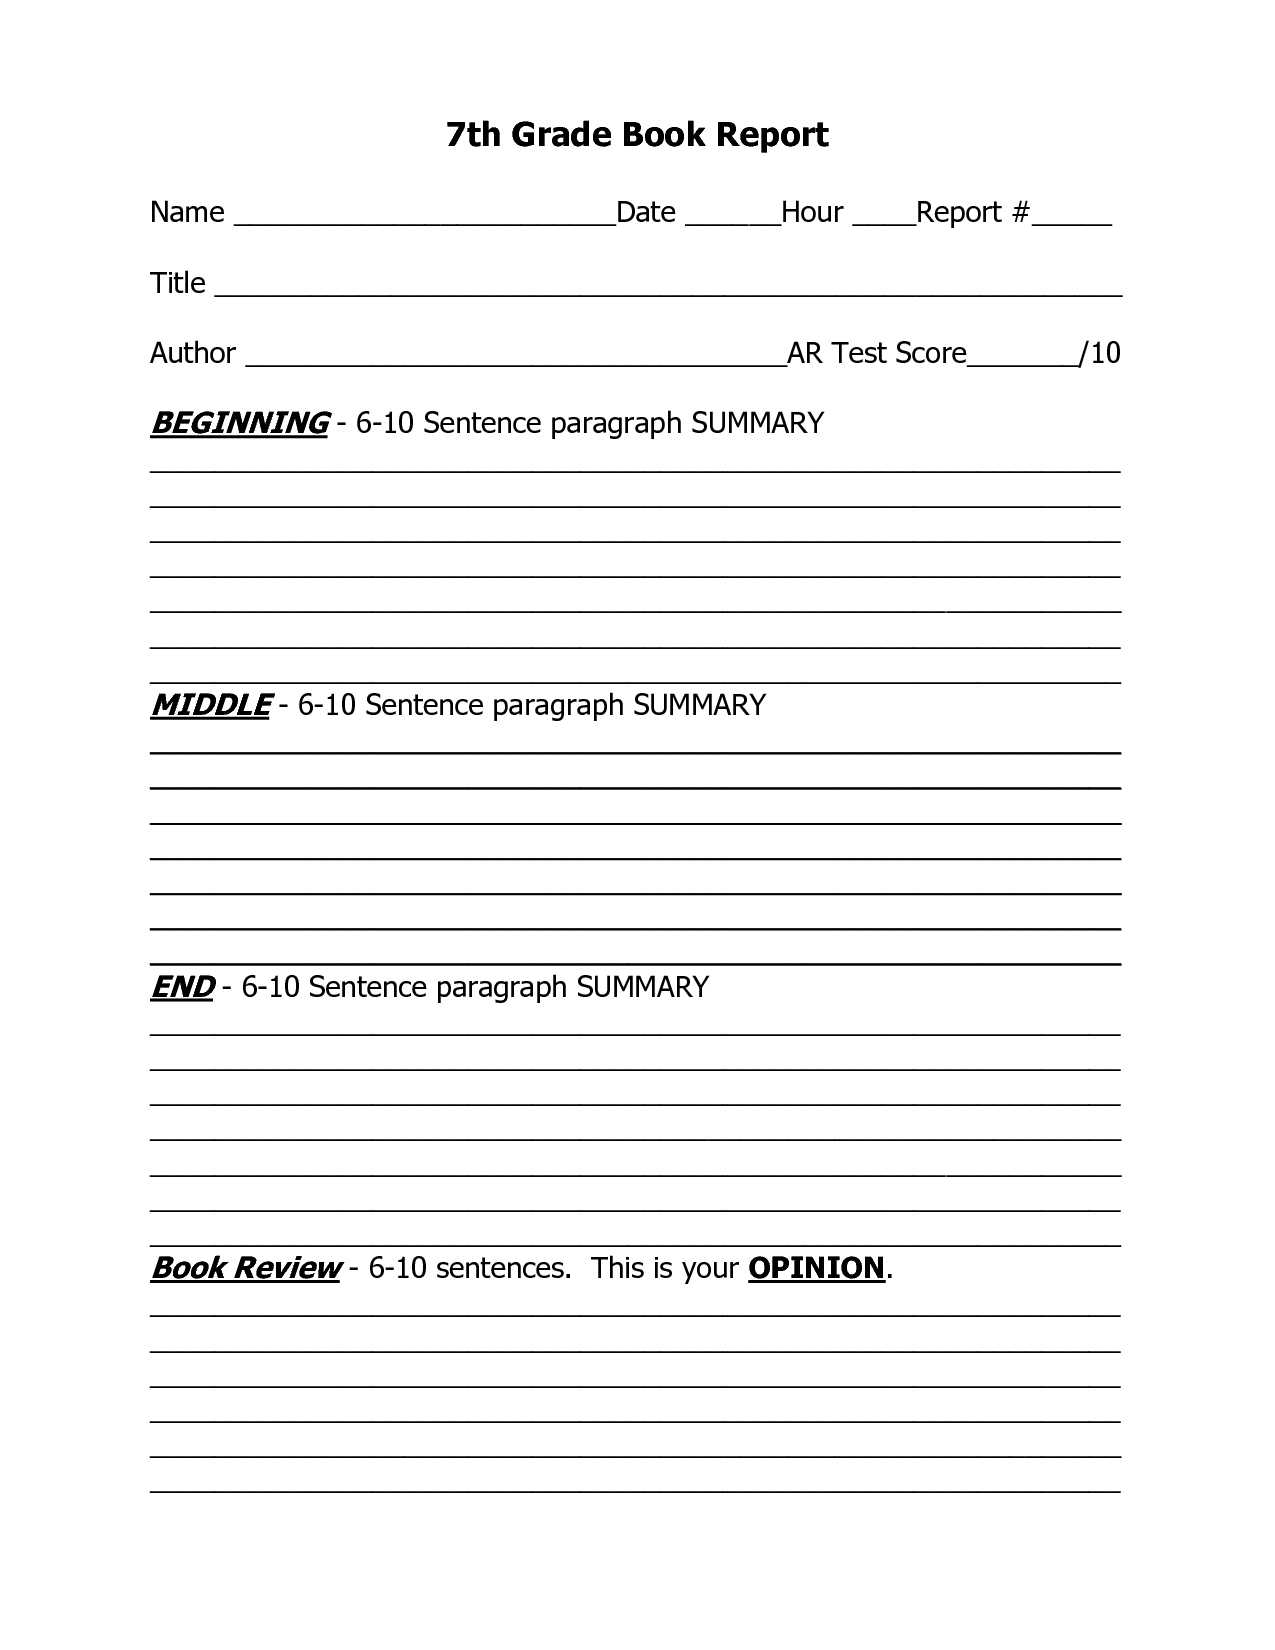 Worksheet Book Report | Printable Worksheets And Activities For First Grade Book Report Template